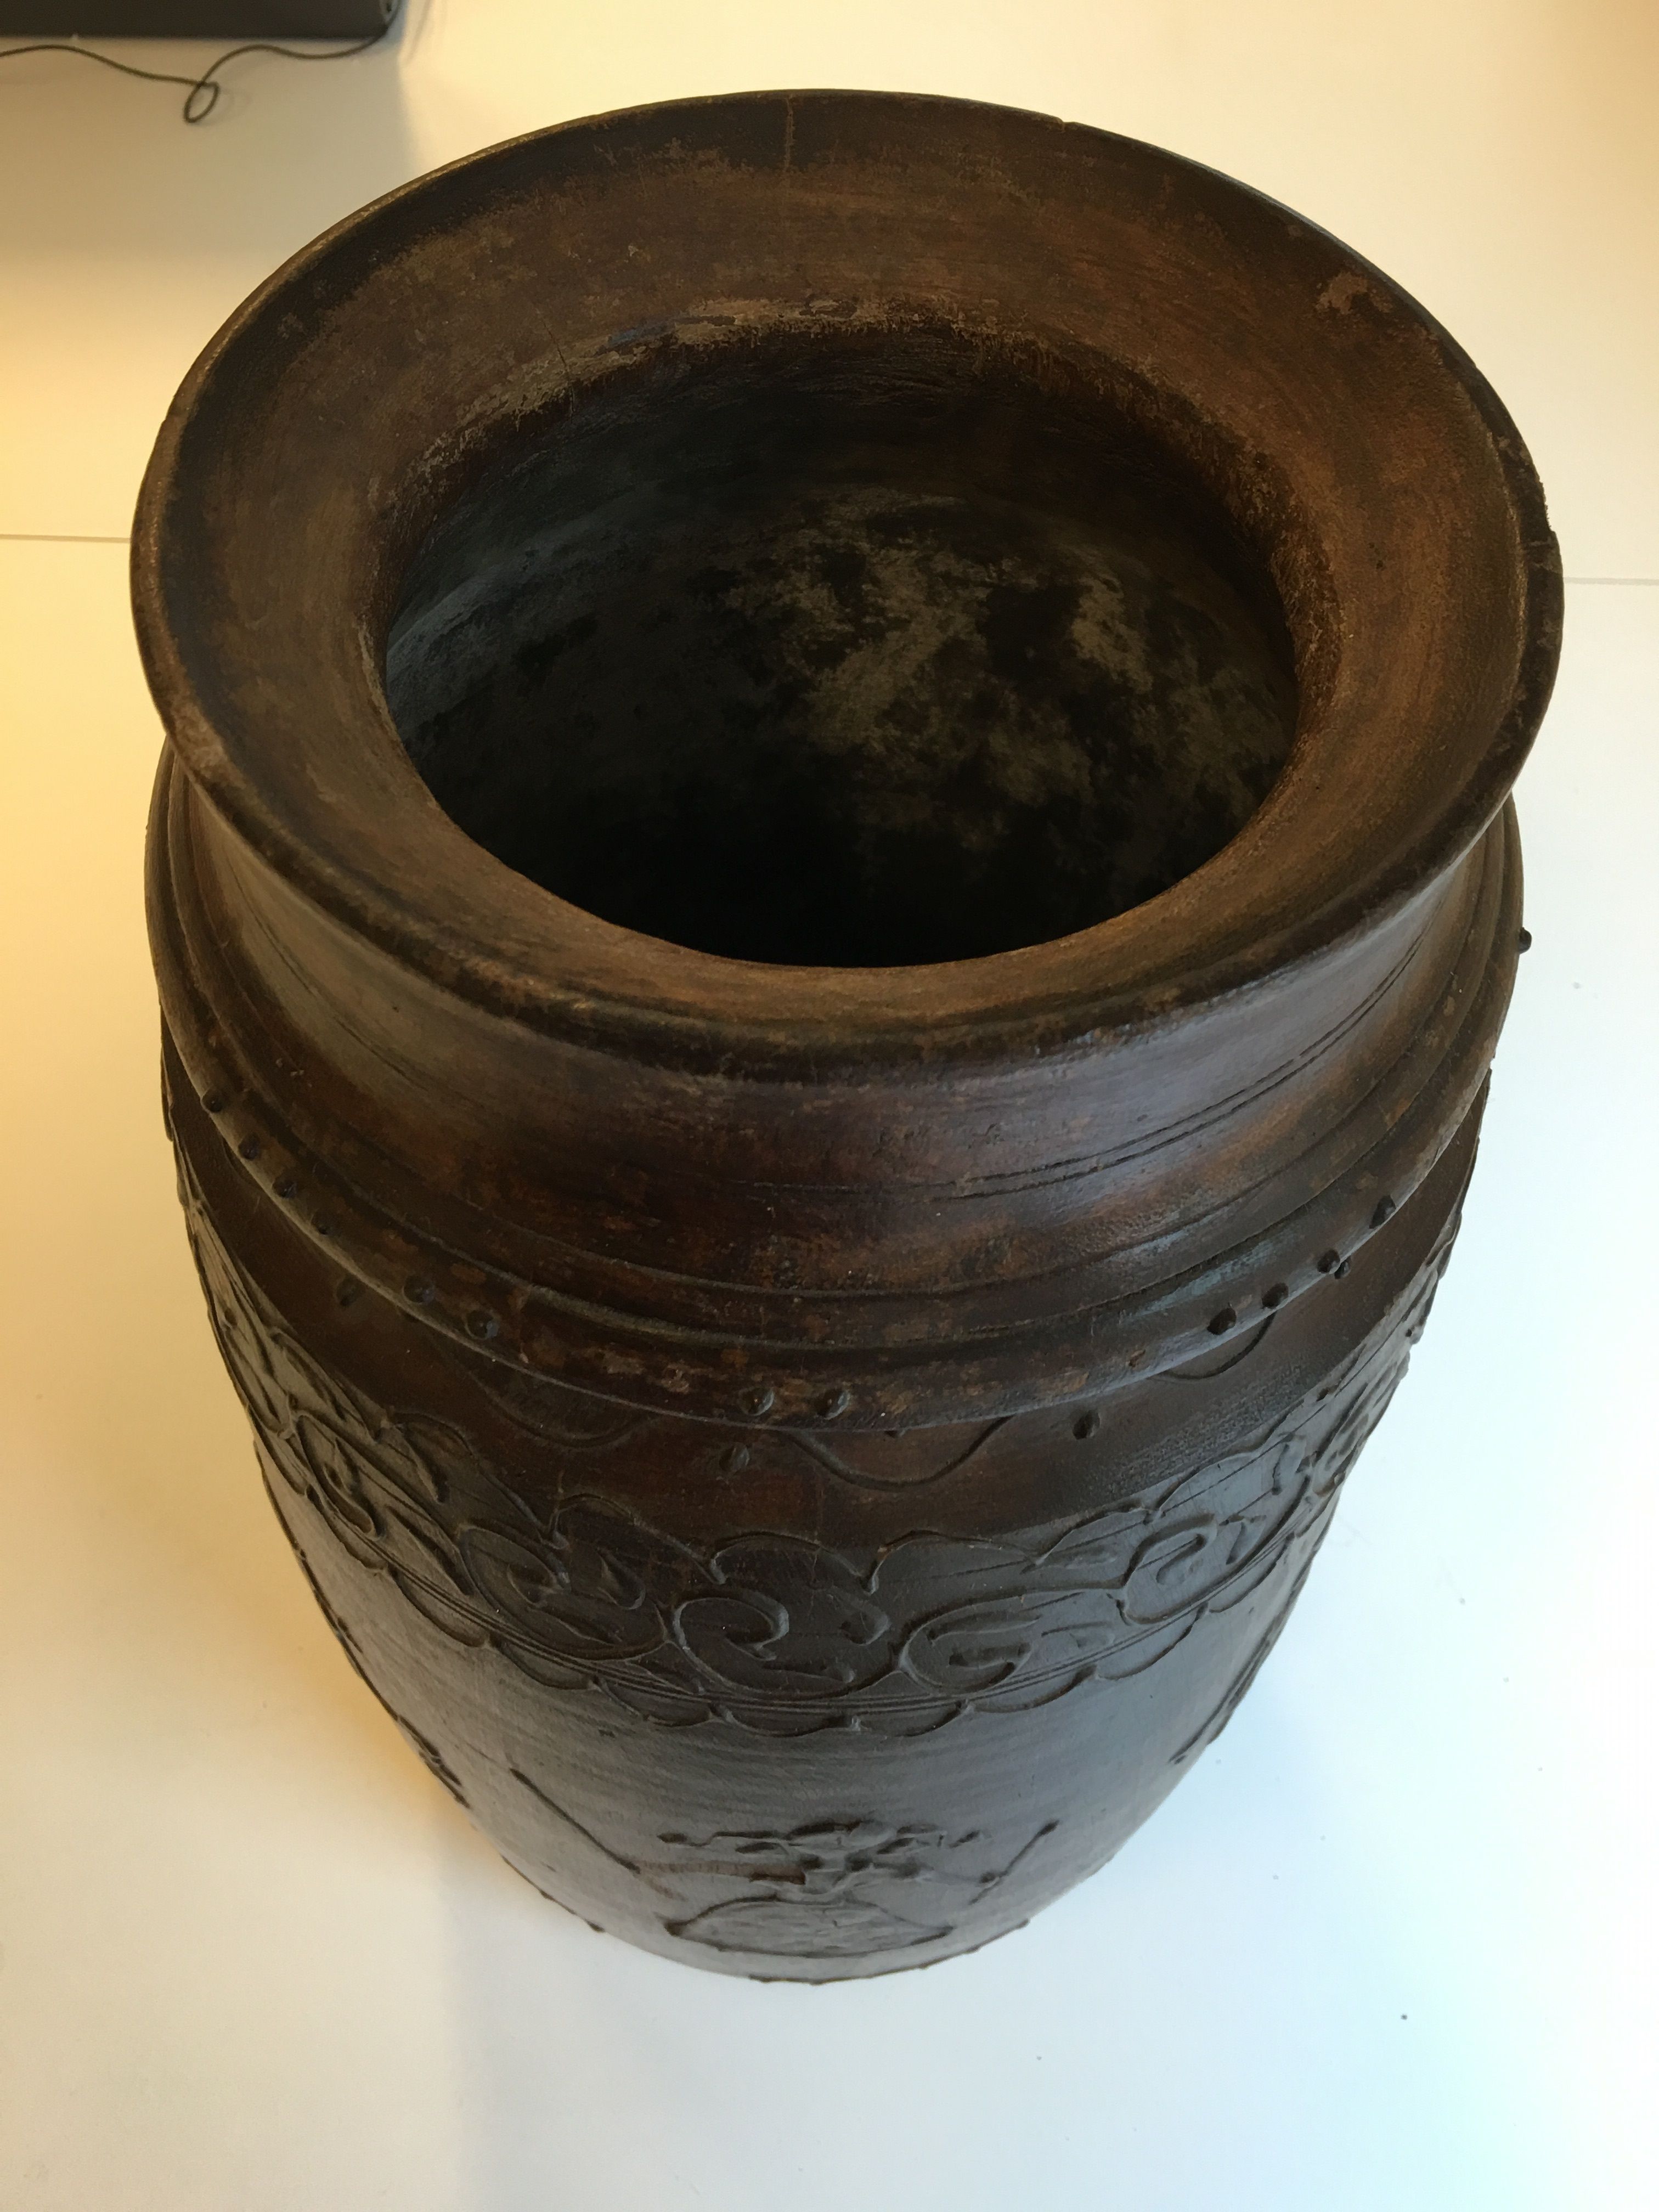 Authentic Indian water jug